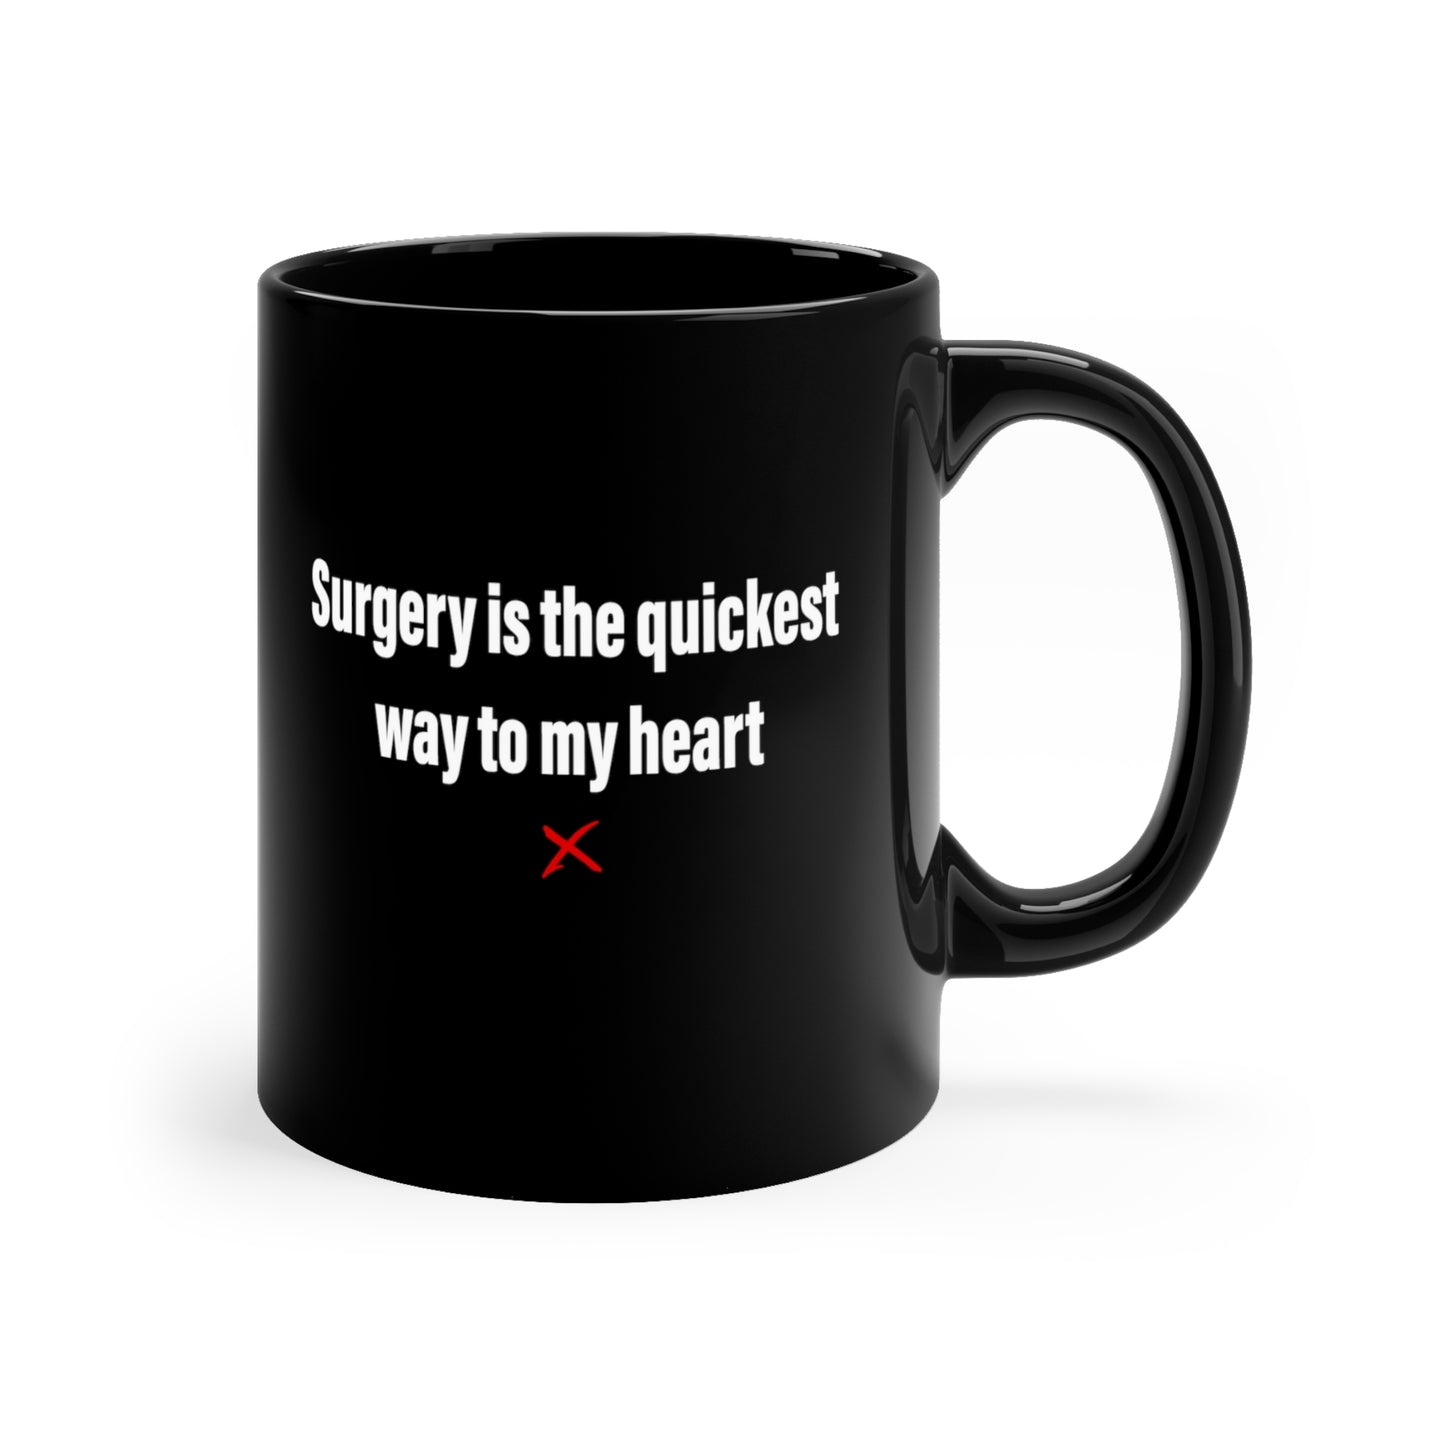 Surgery is the quickest way to my heart - Mug